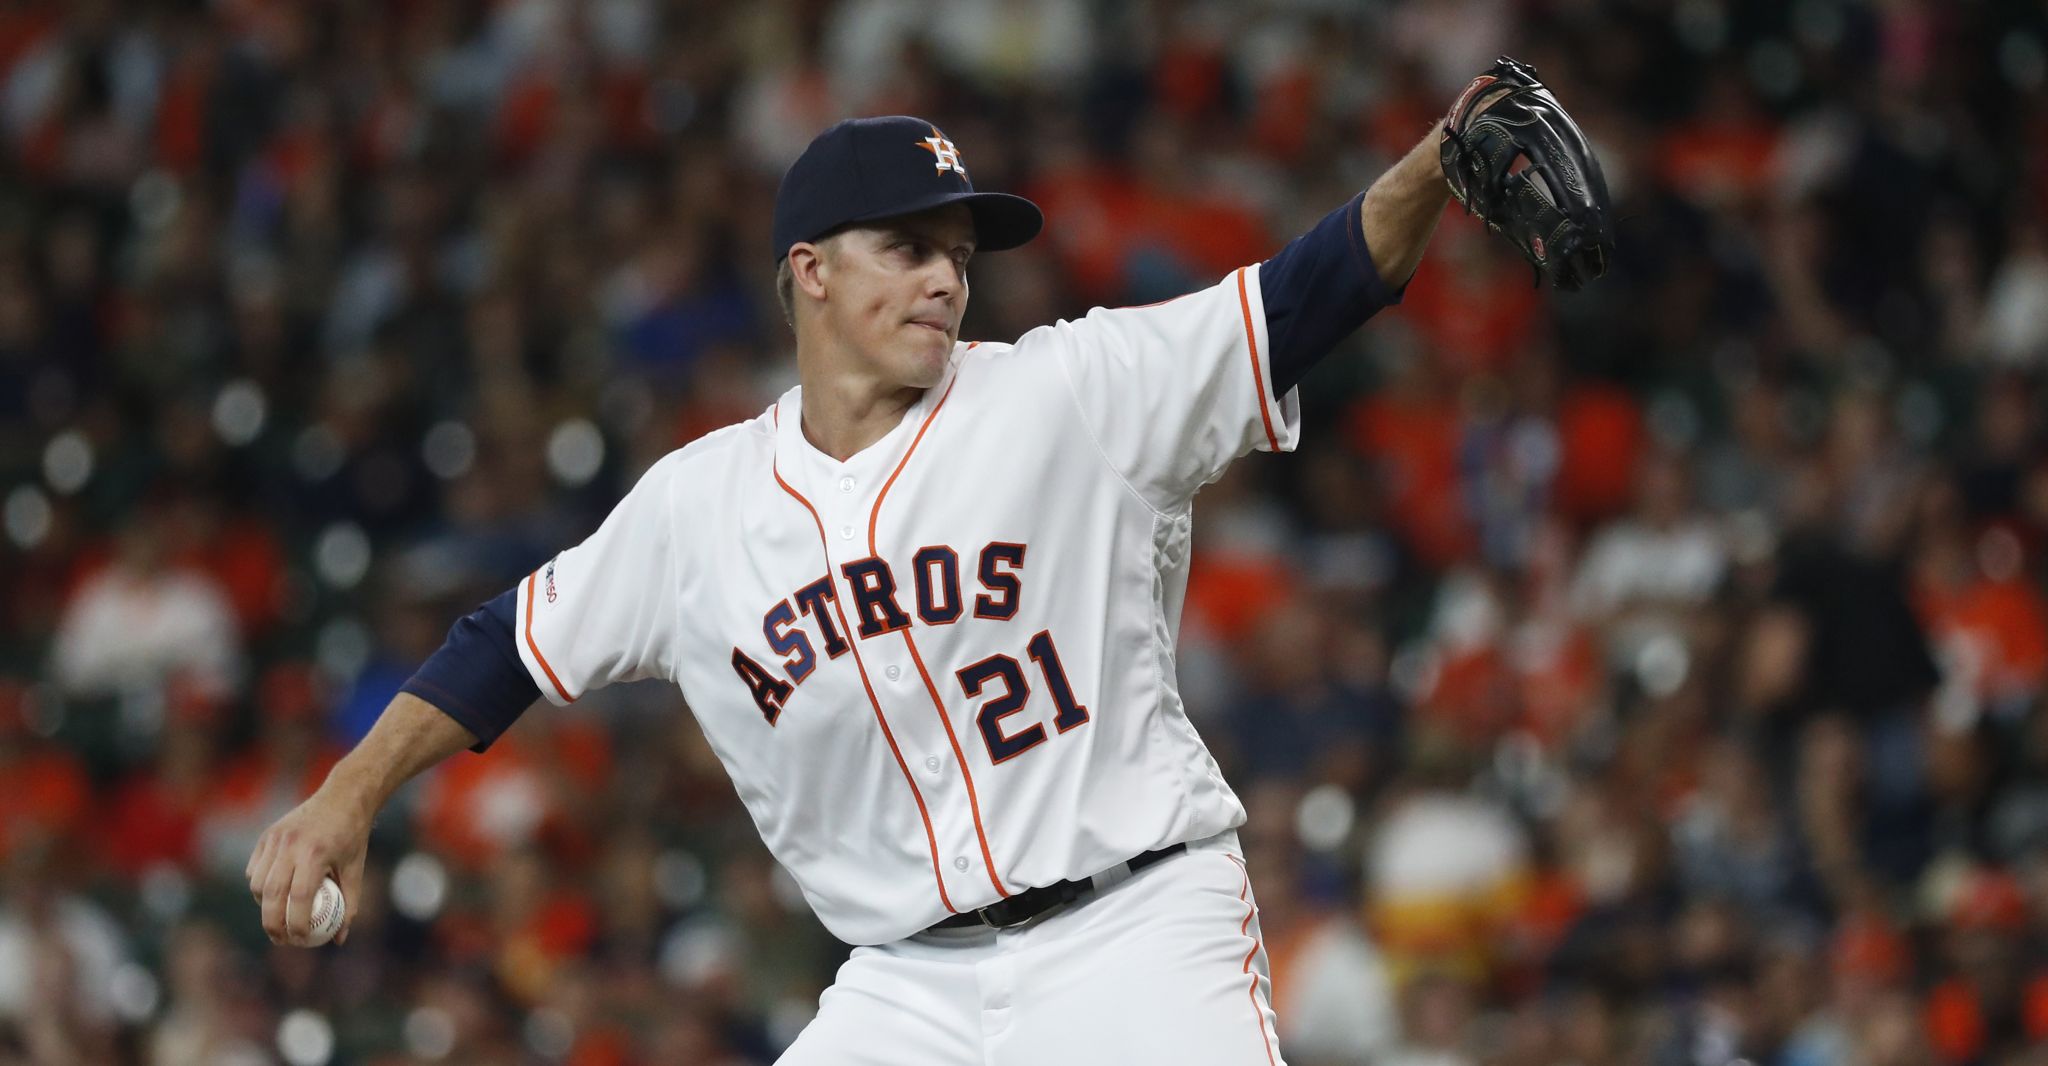 MLB playoffs: Zack Greinke pitches Astros to win over Rays - Sports  Illustrated